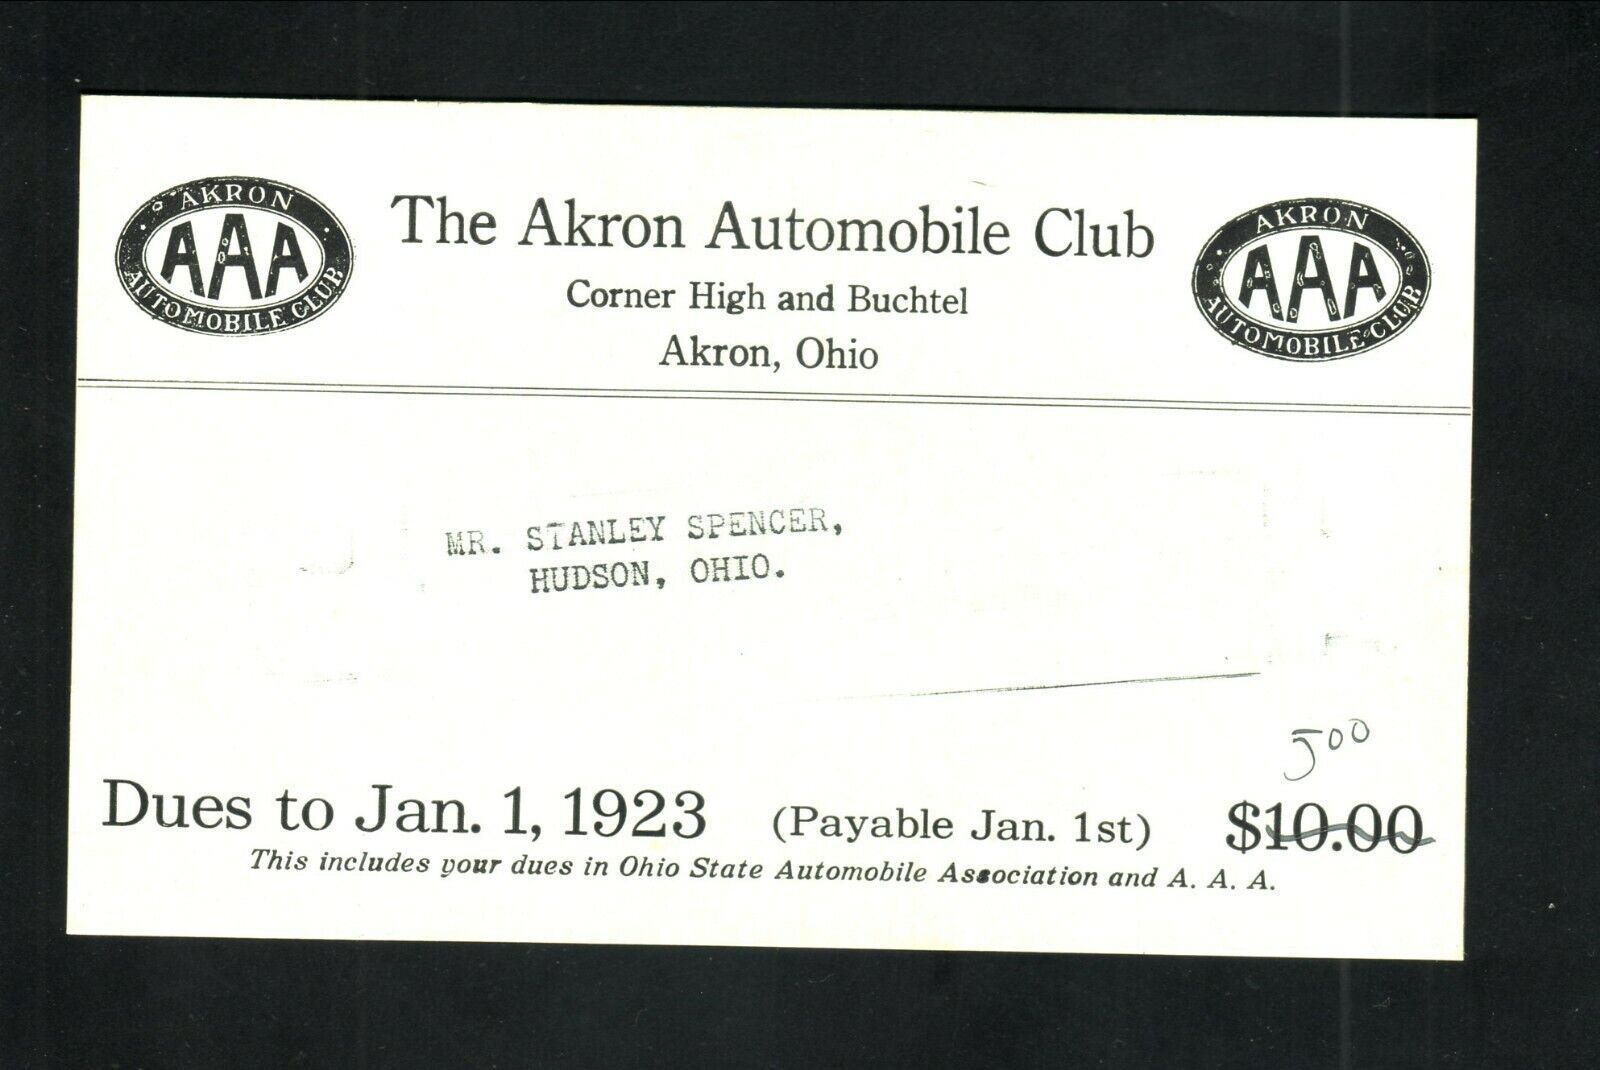 AAA--Akron Automobile Club--1923 Annual Dues Card Notice